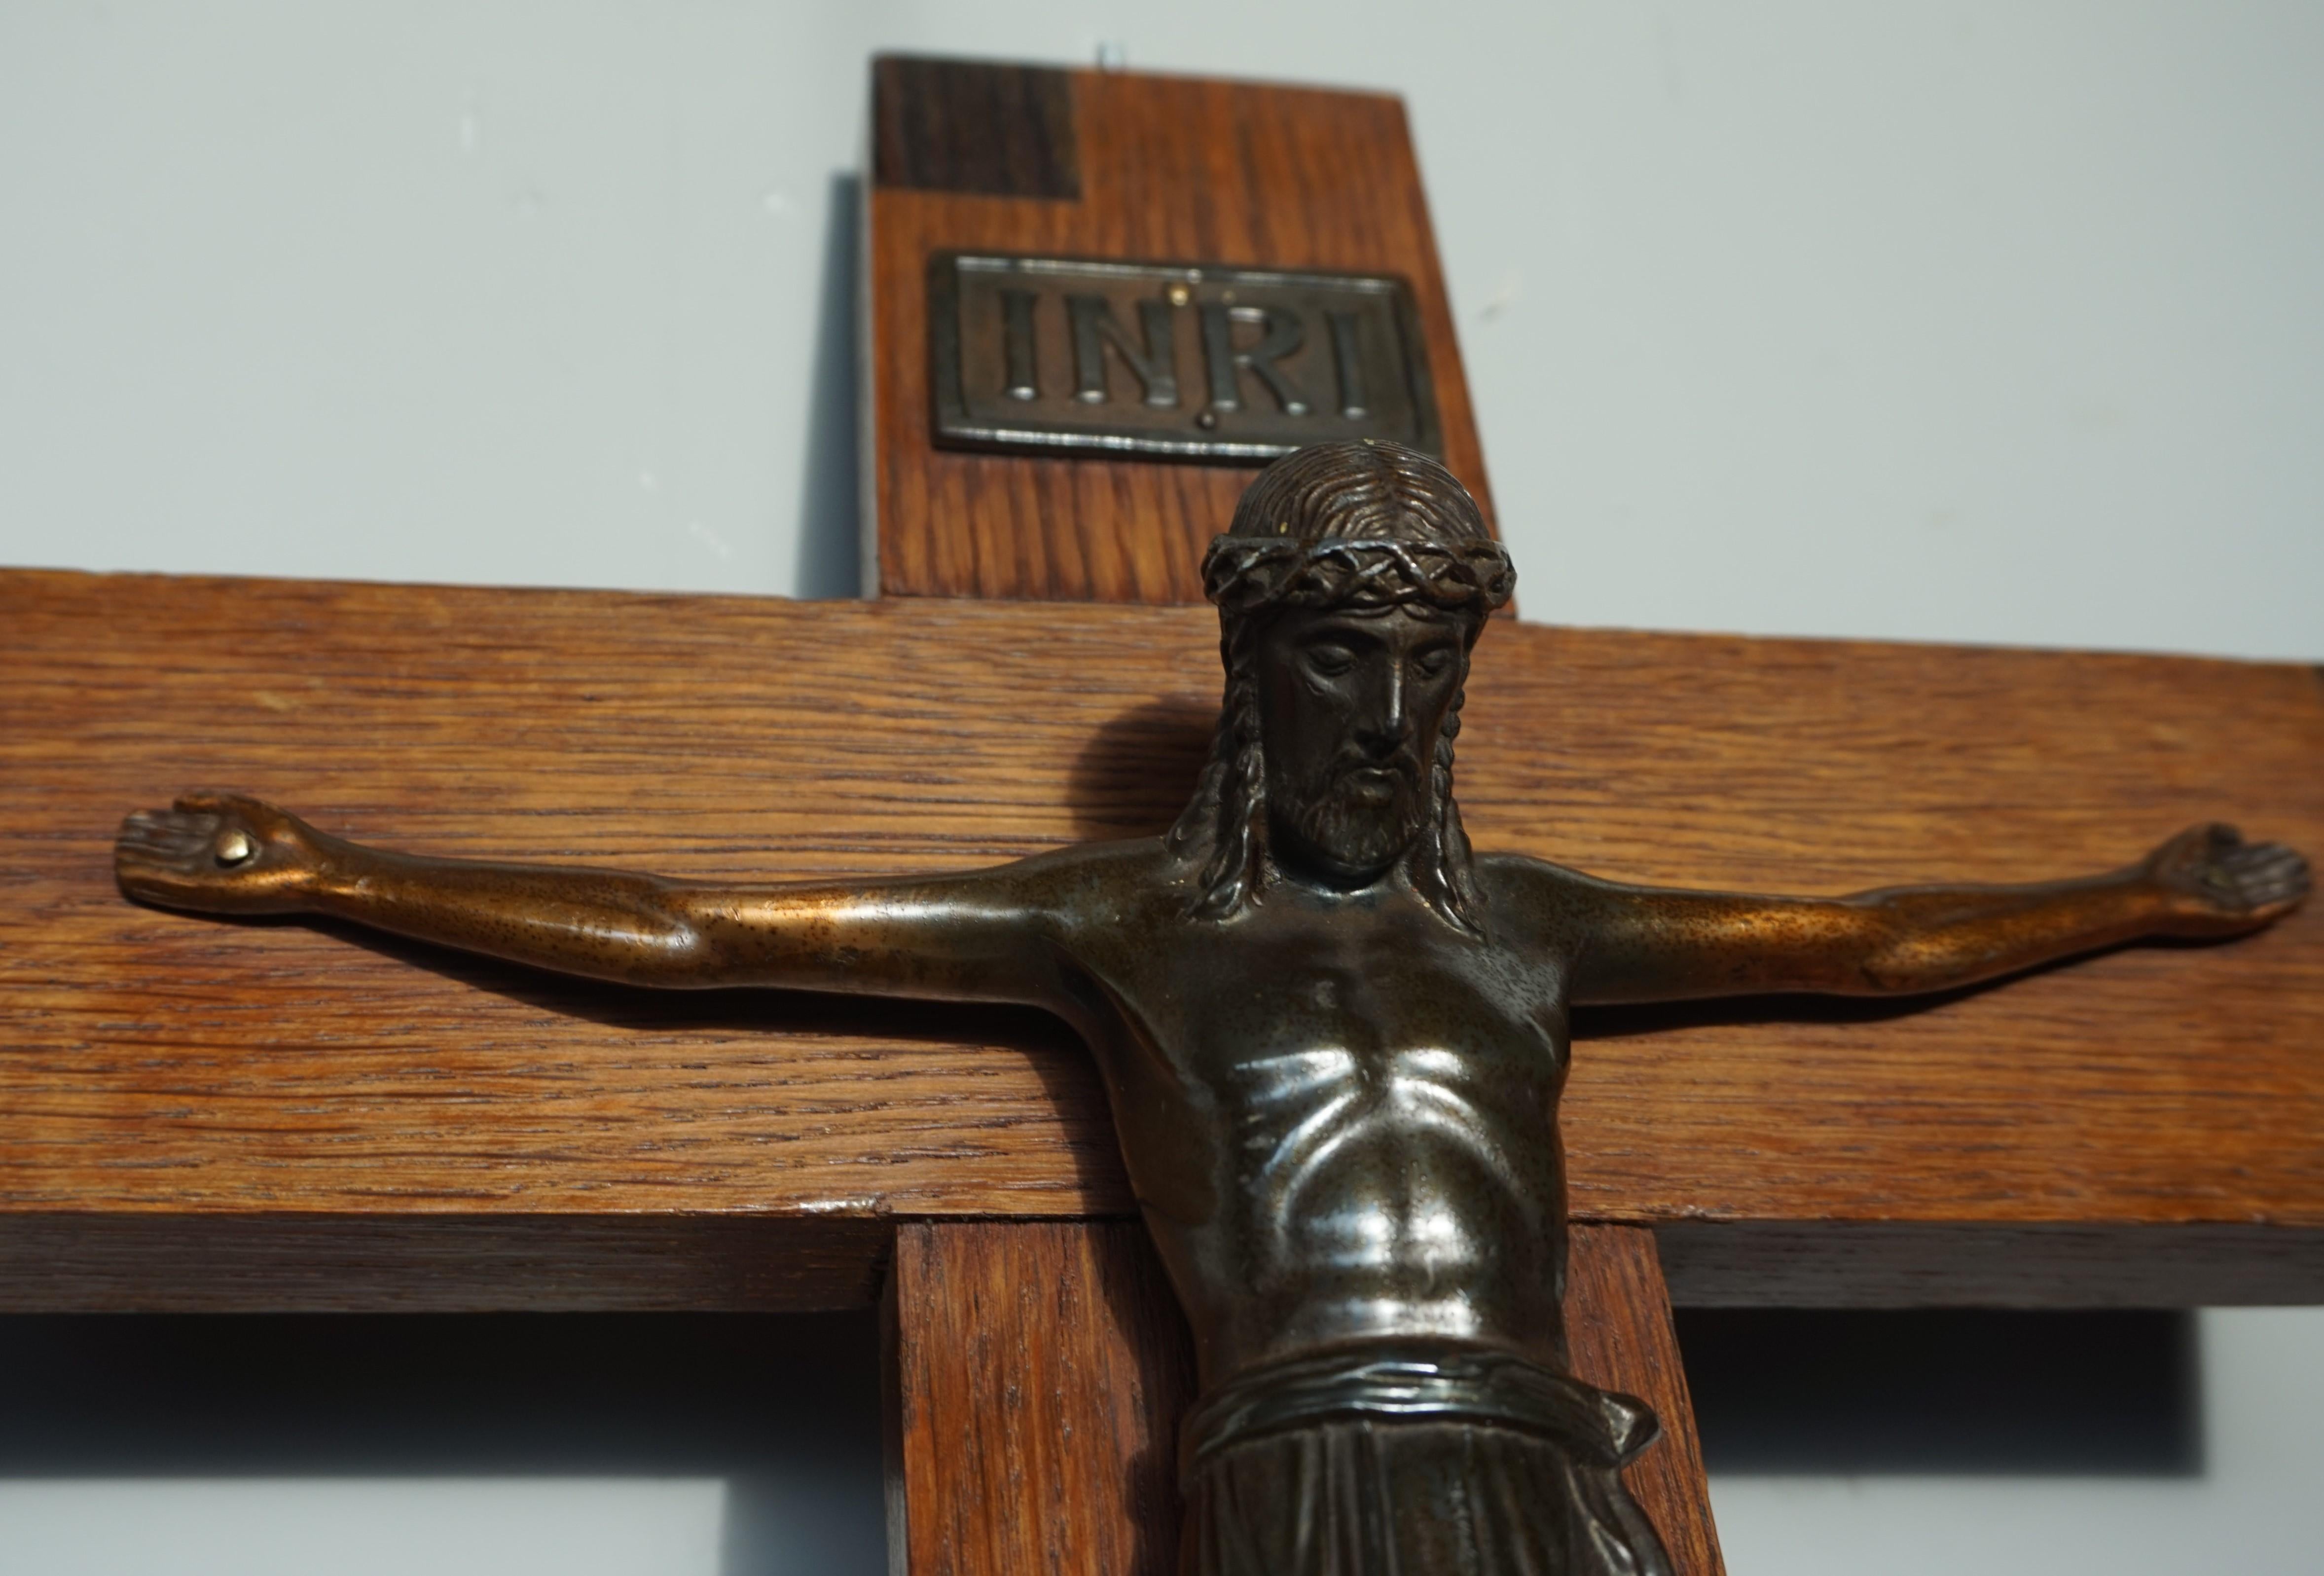 Stylish and quality handcrafted, early 1900s crucifix.

This very good quality crucifix comes with an incredibly detailed corpus and head of Christ and a striking, solid oak wooden cross with inlaid motifs of coromandel. We have sold some rare and